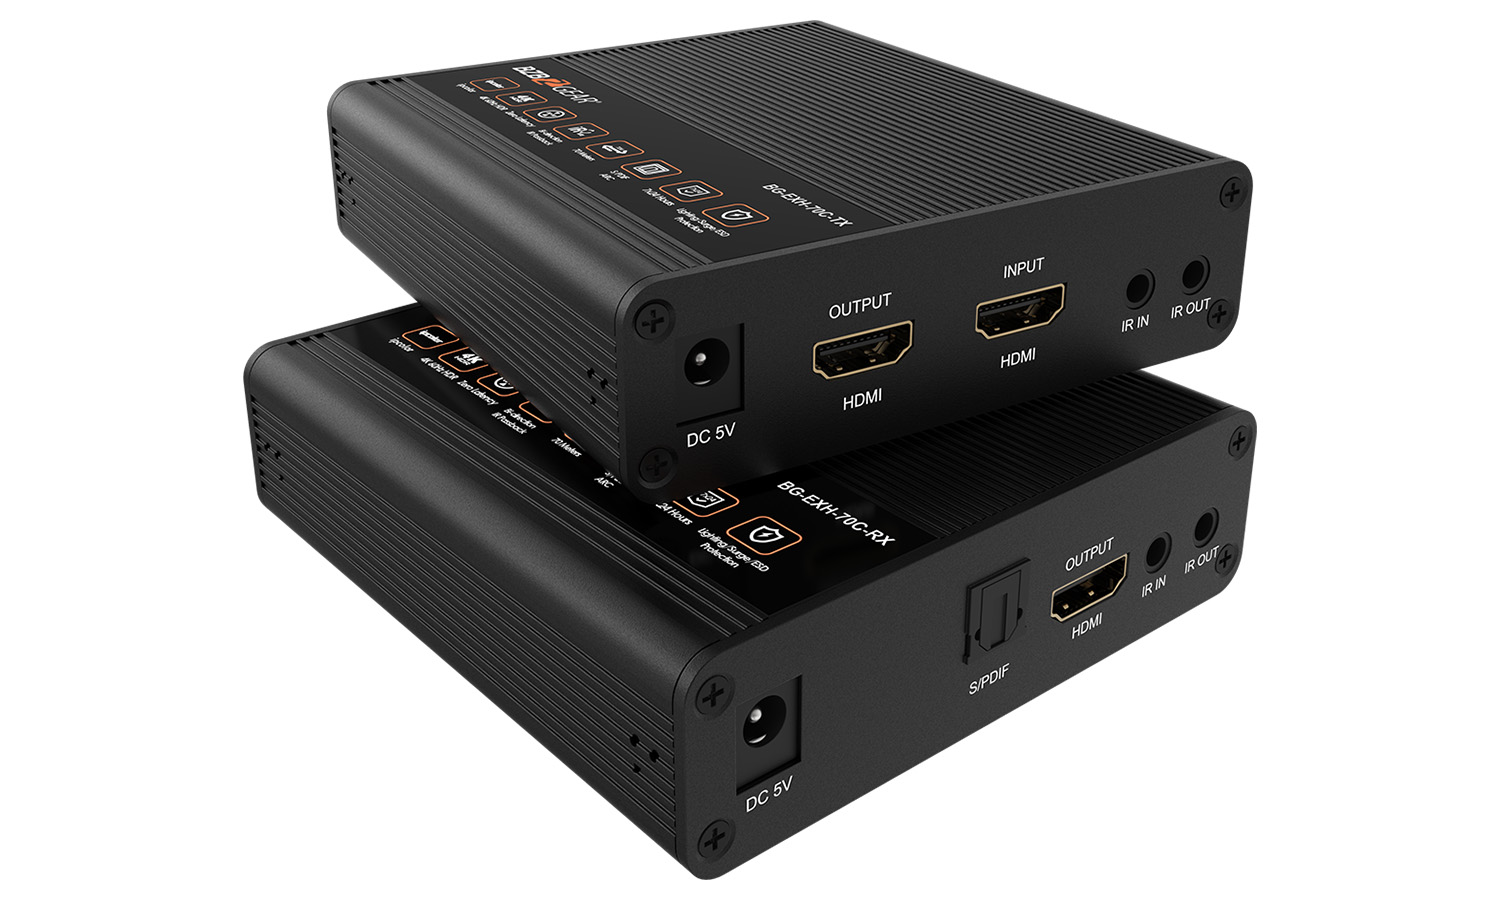 BG-EXH-70C 4K 18Gbps HDMI Extender with Bi-directional IR and Zero Latency up to 70m/230ft by BZBGEAR